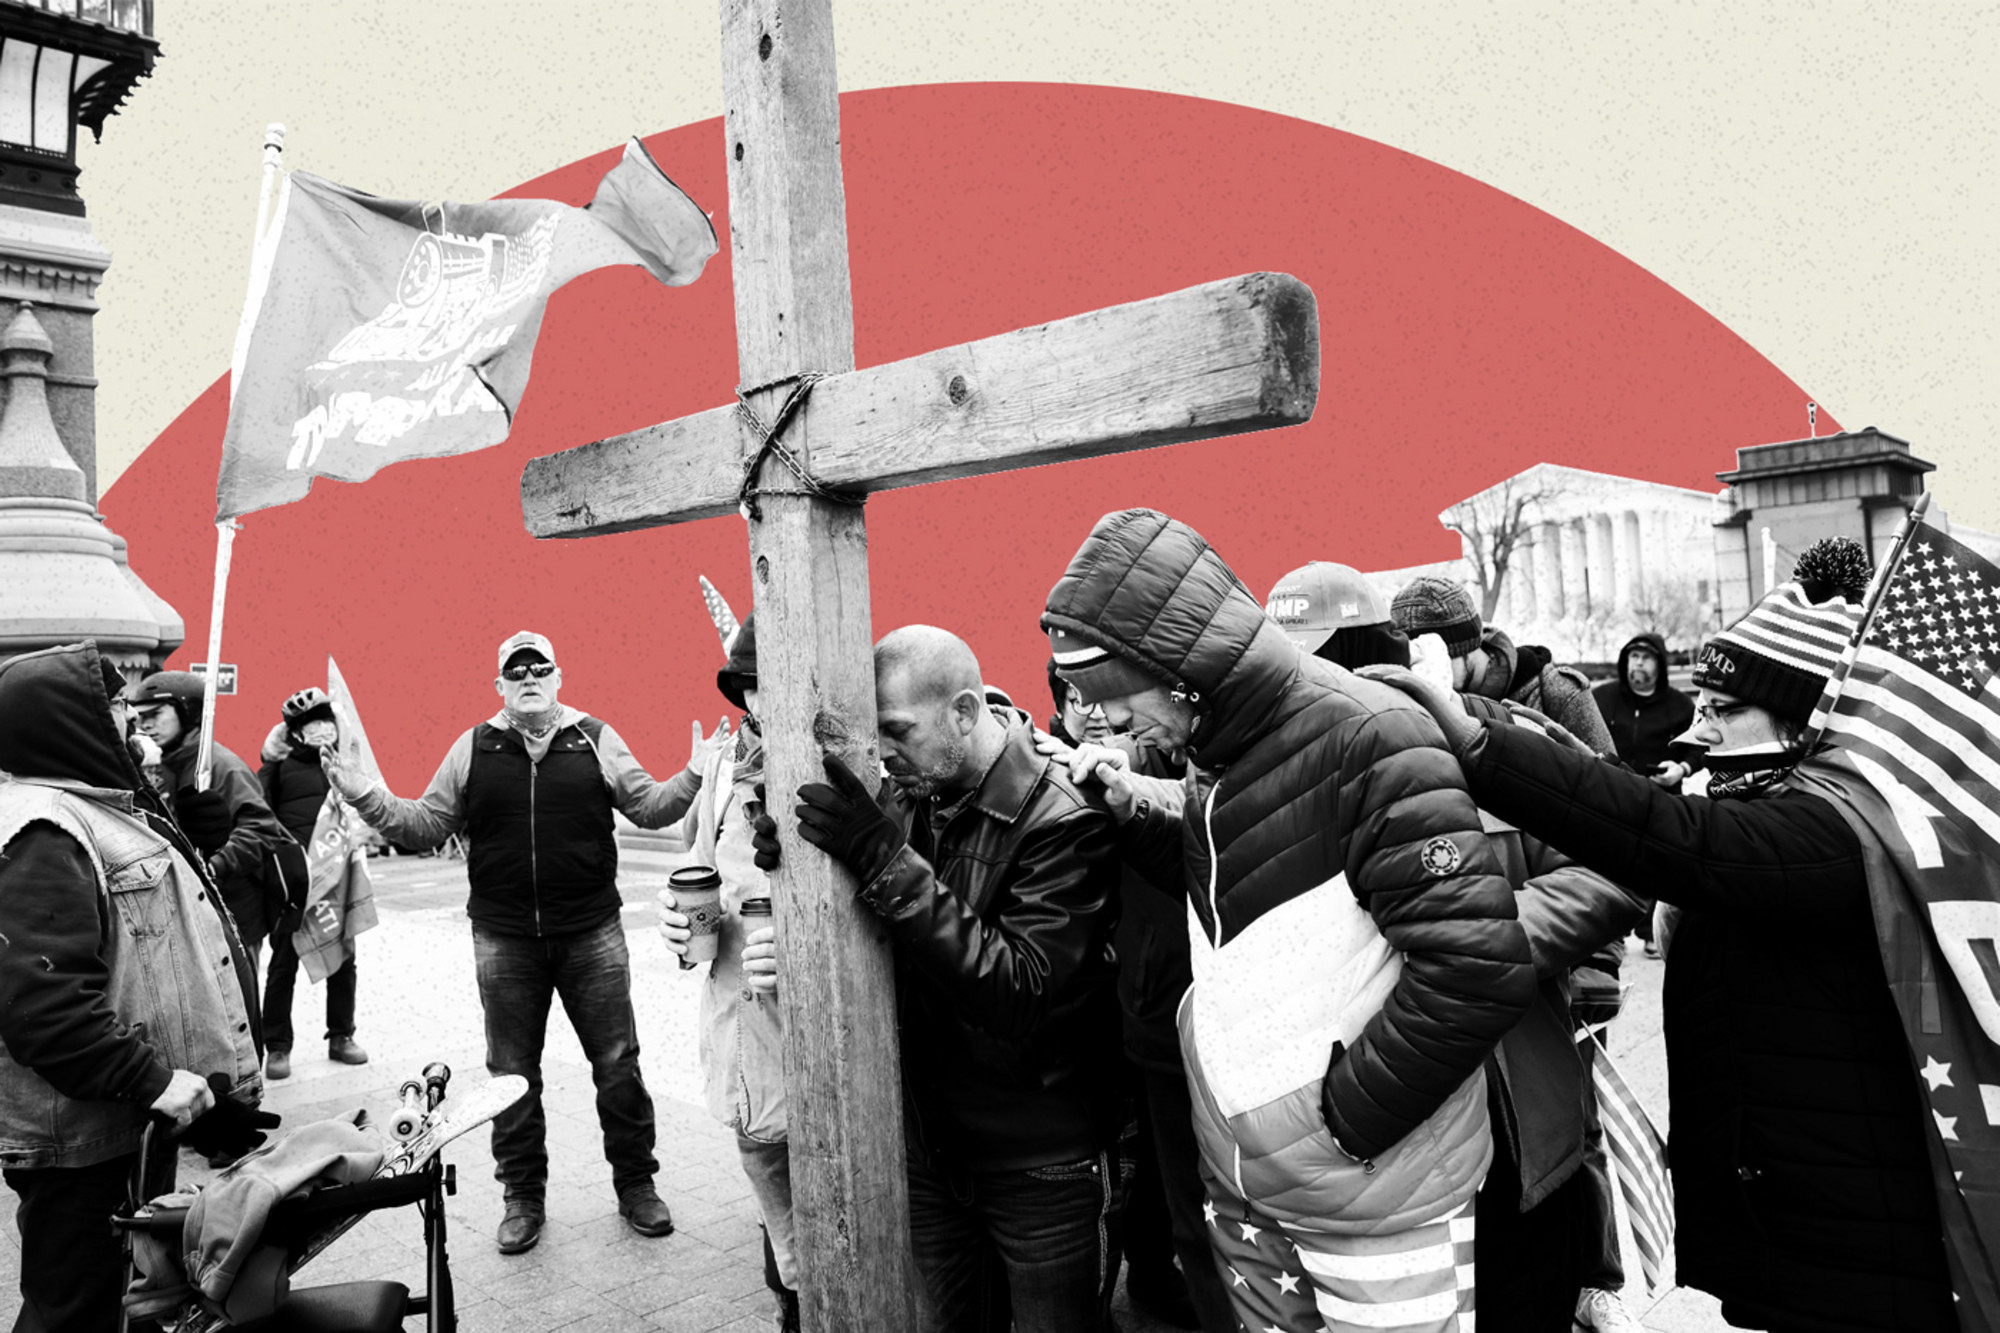 It’s Time to Talk About Violent Christian Extremism